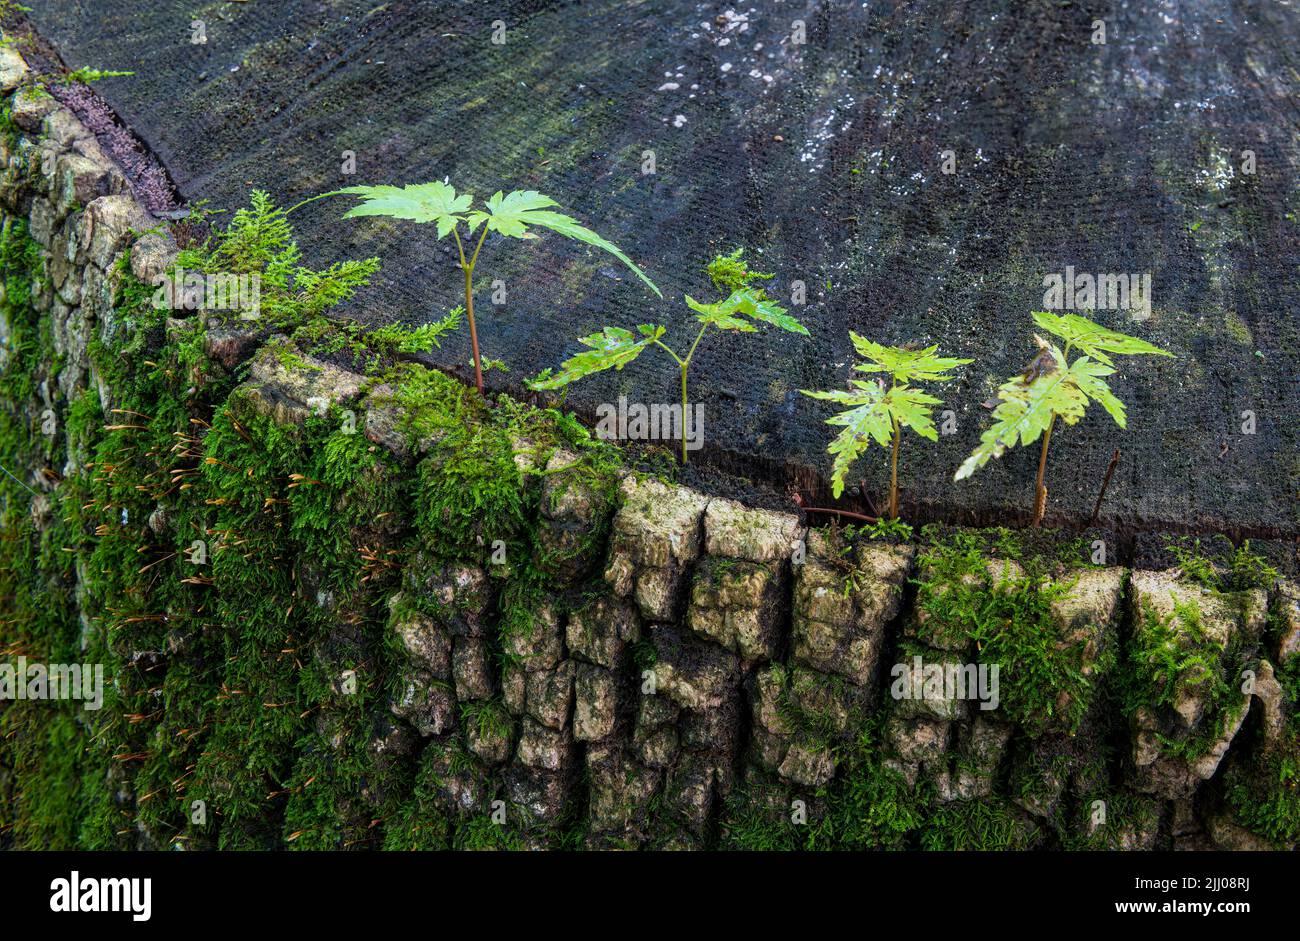 Japanese maple seedlings (Acer palmatum) growing from crack in the stump of an old tree. Stock Photo